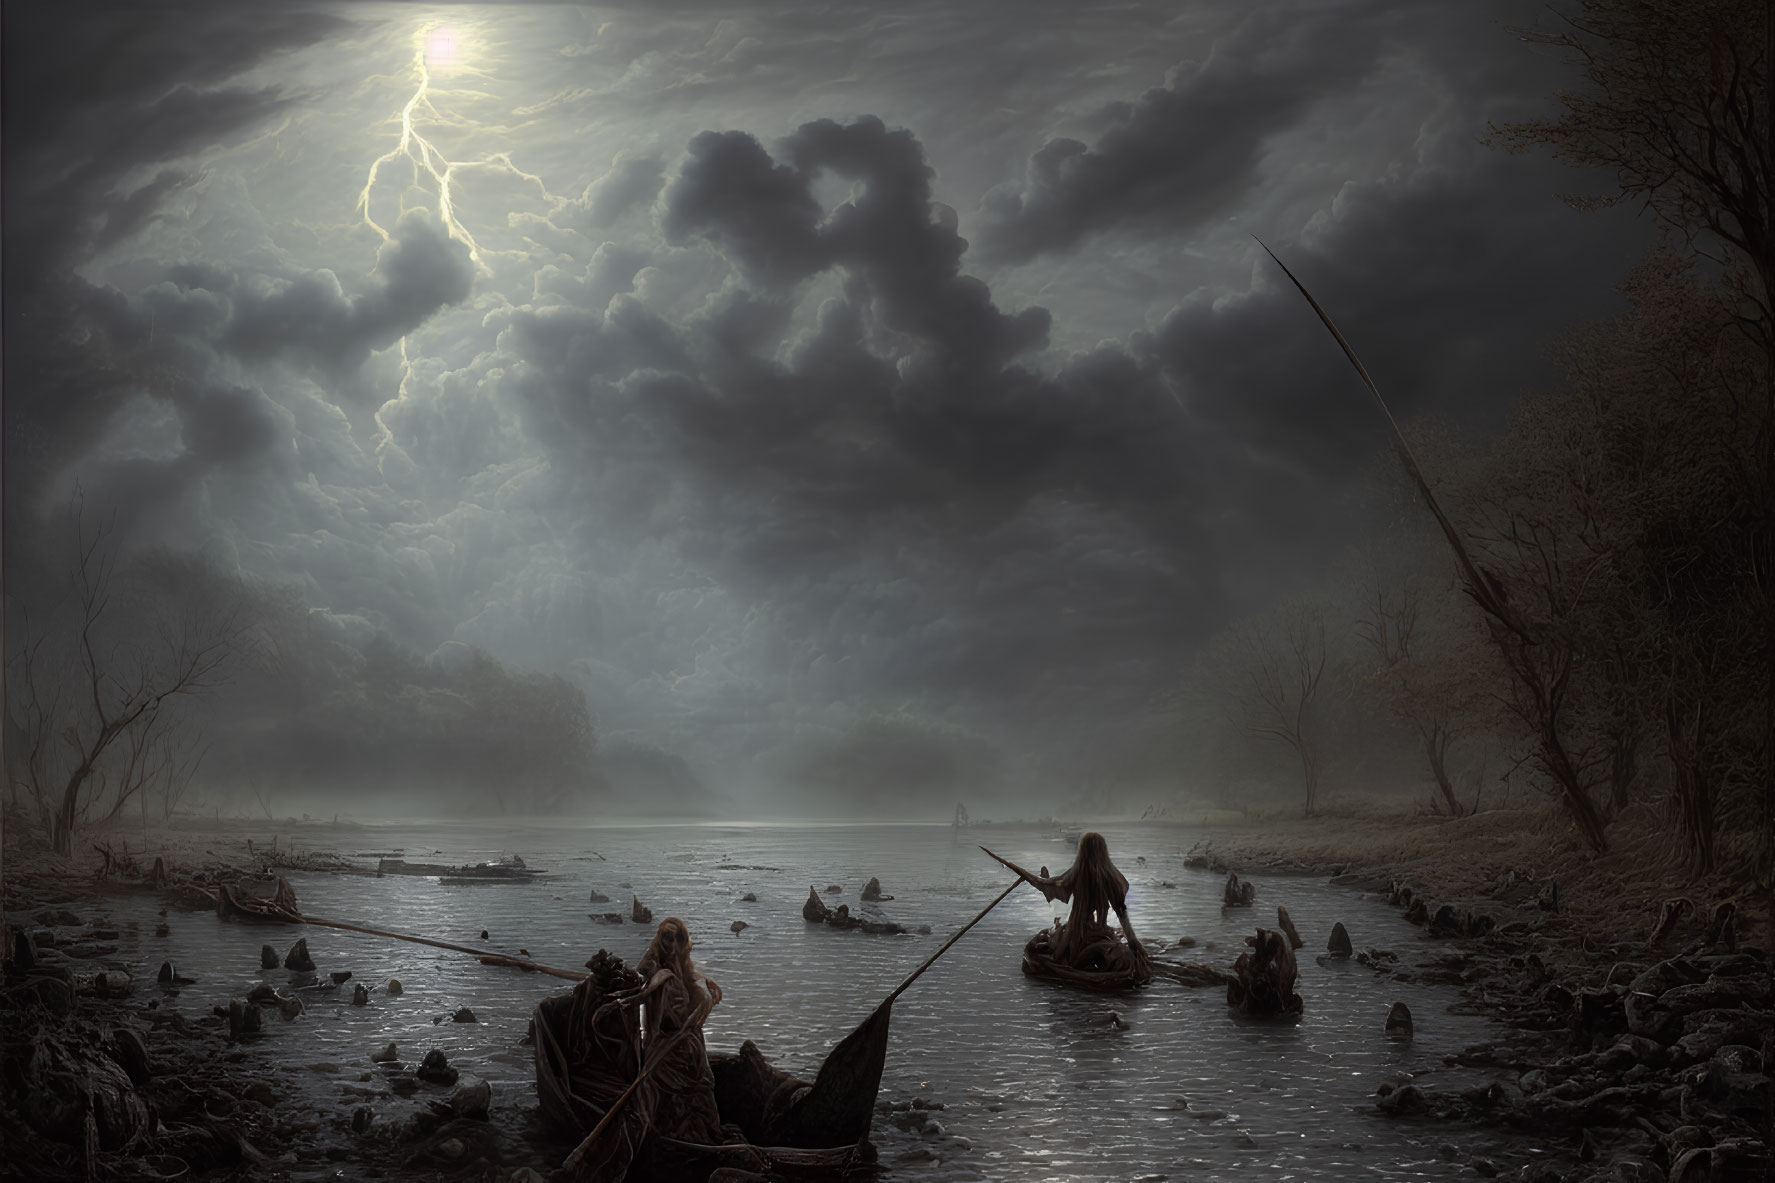 Nighttime river scene with boats under stormy sky.